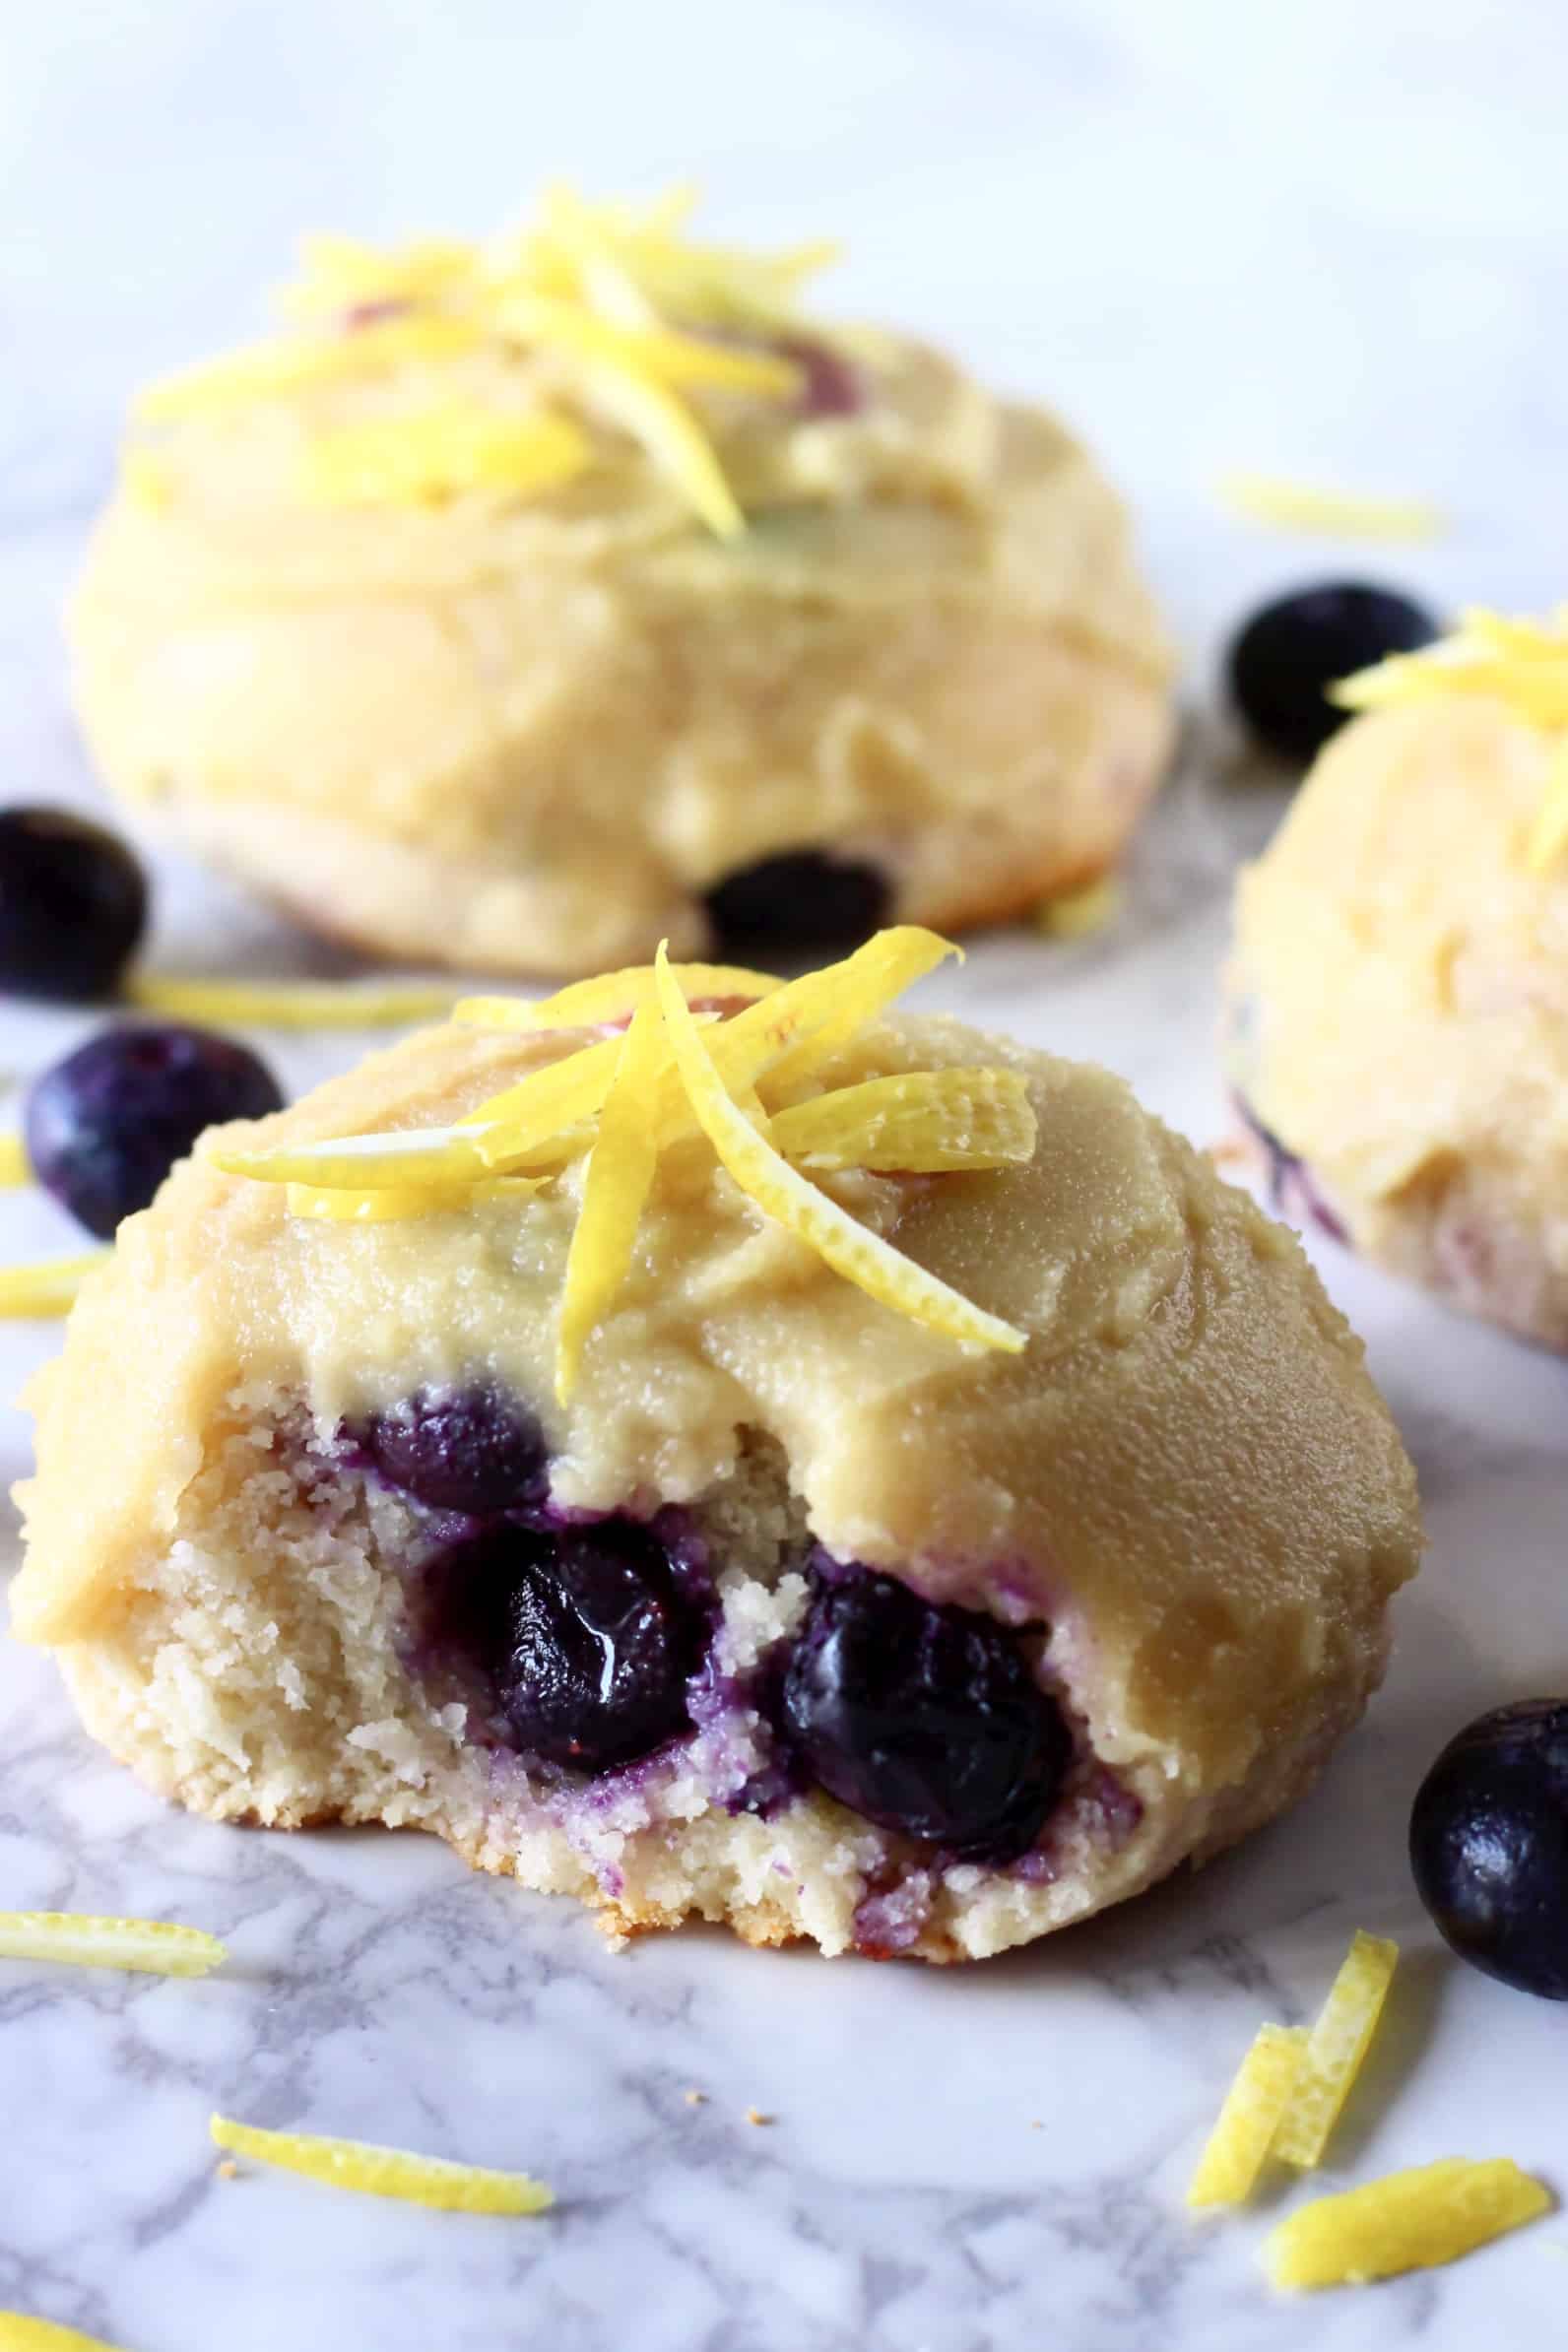 Three gluten-free vegan lemon blueberry cookies with frosting and a bite taken out of one